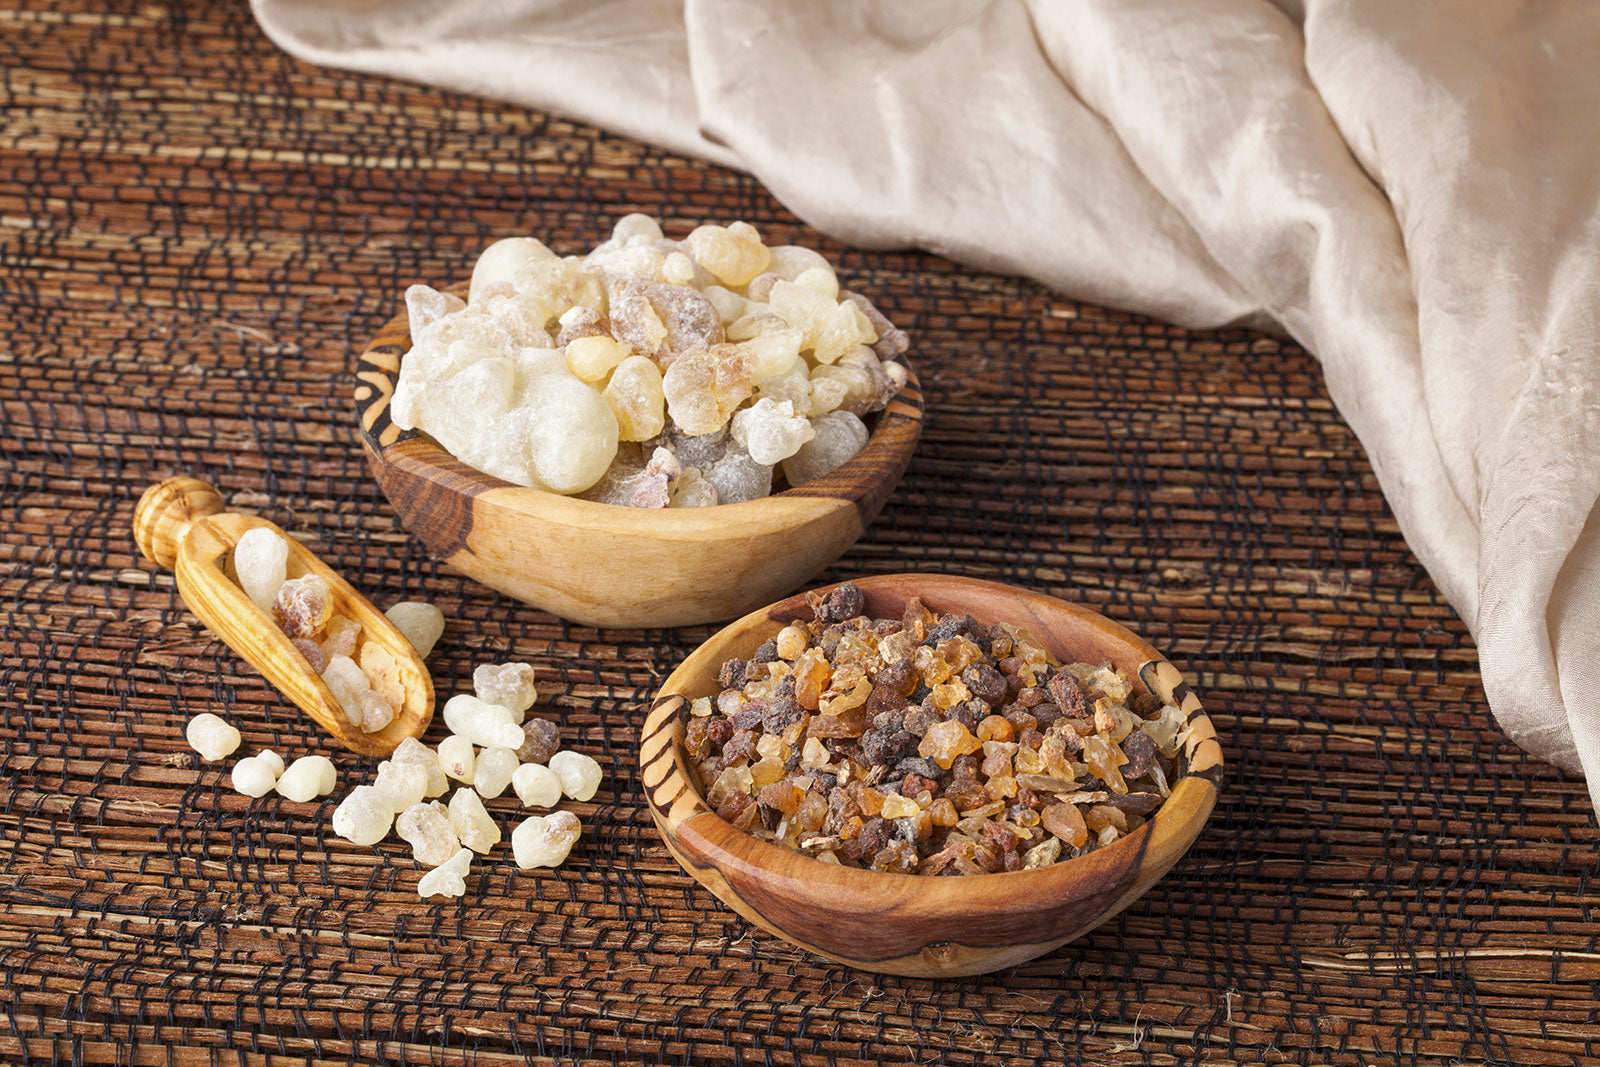 The Buzz about Boswellia